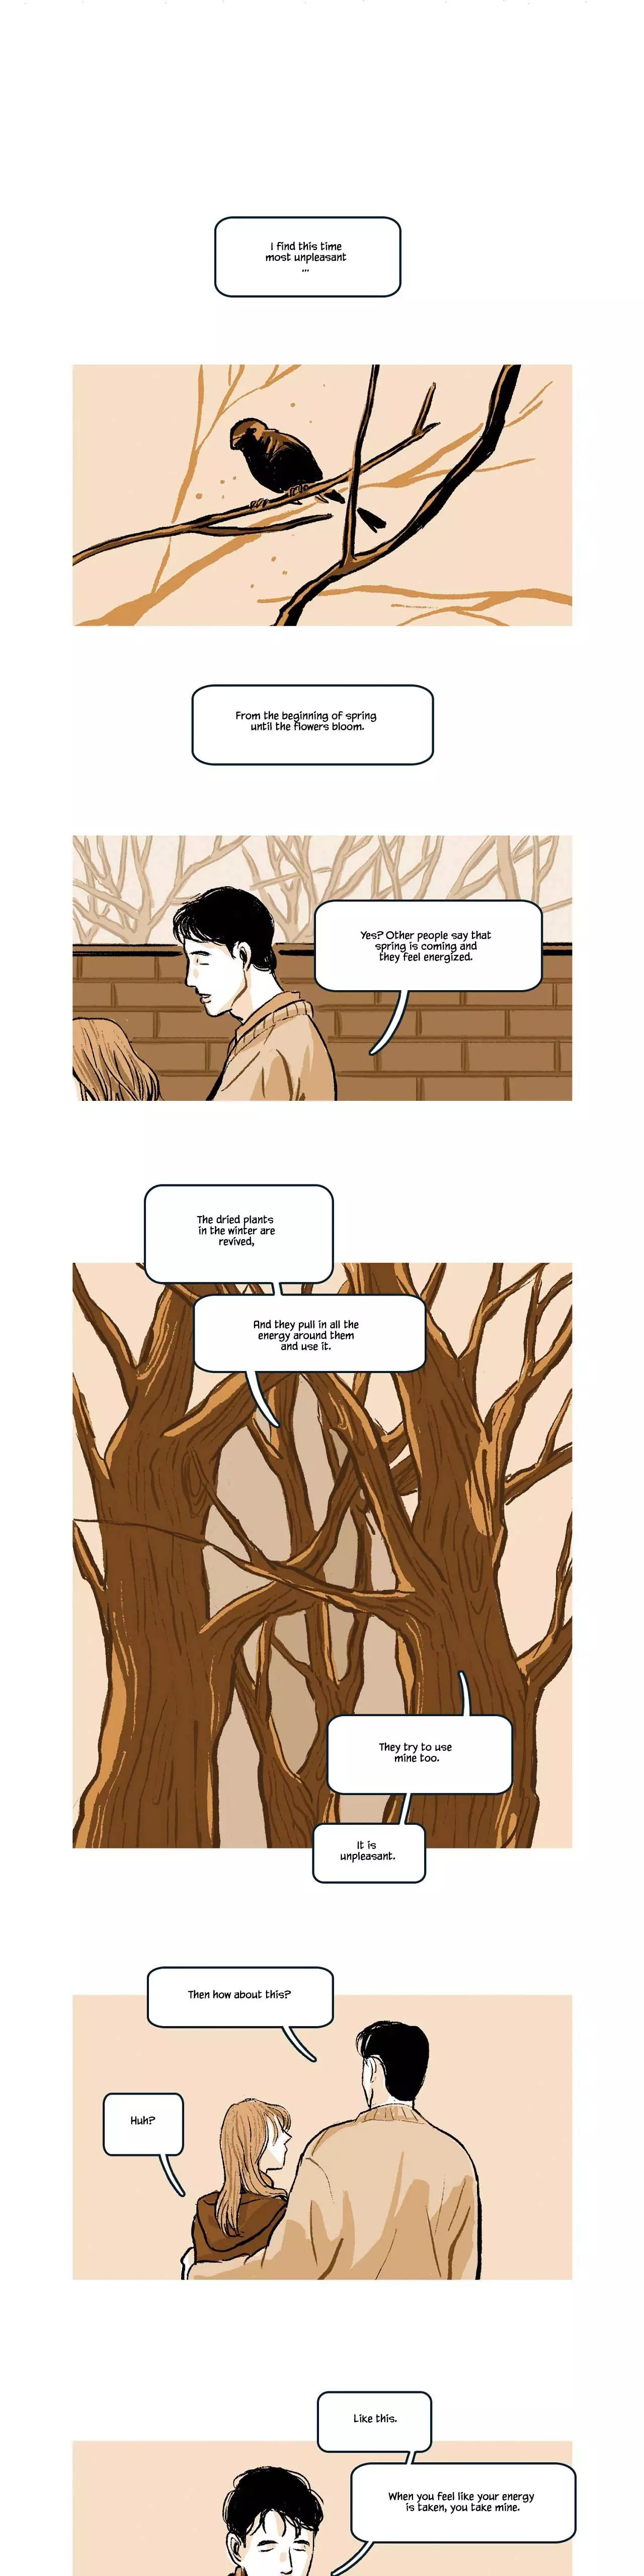 The Professor Who Reads Love Stories - 19 page 1-975724b7